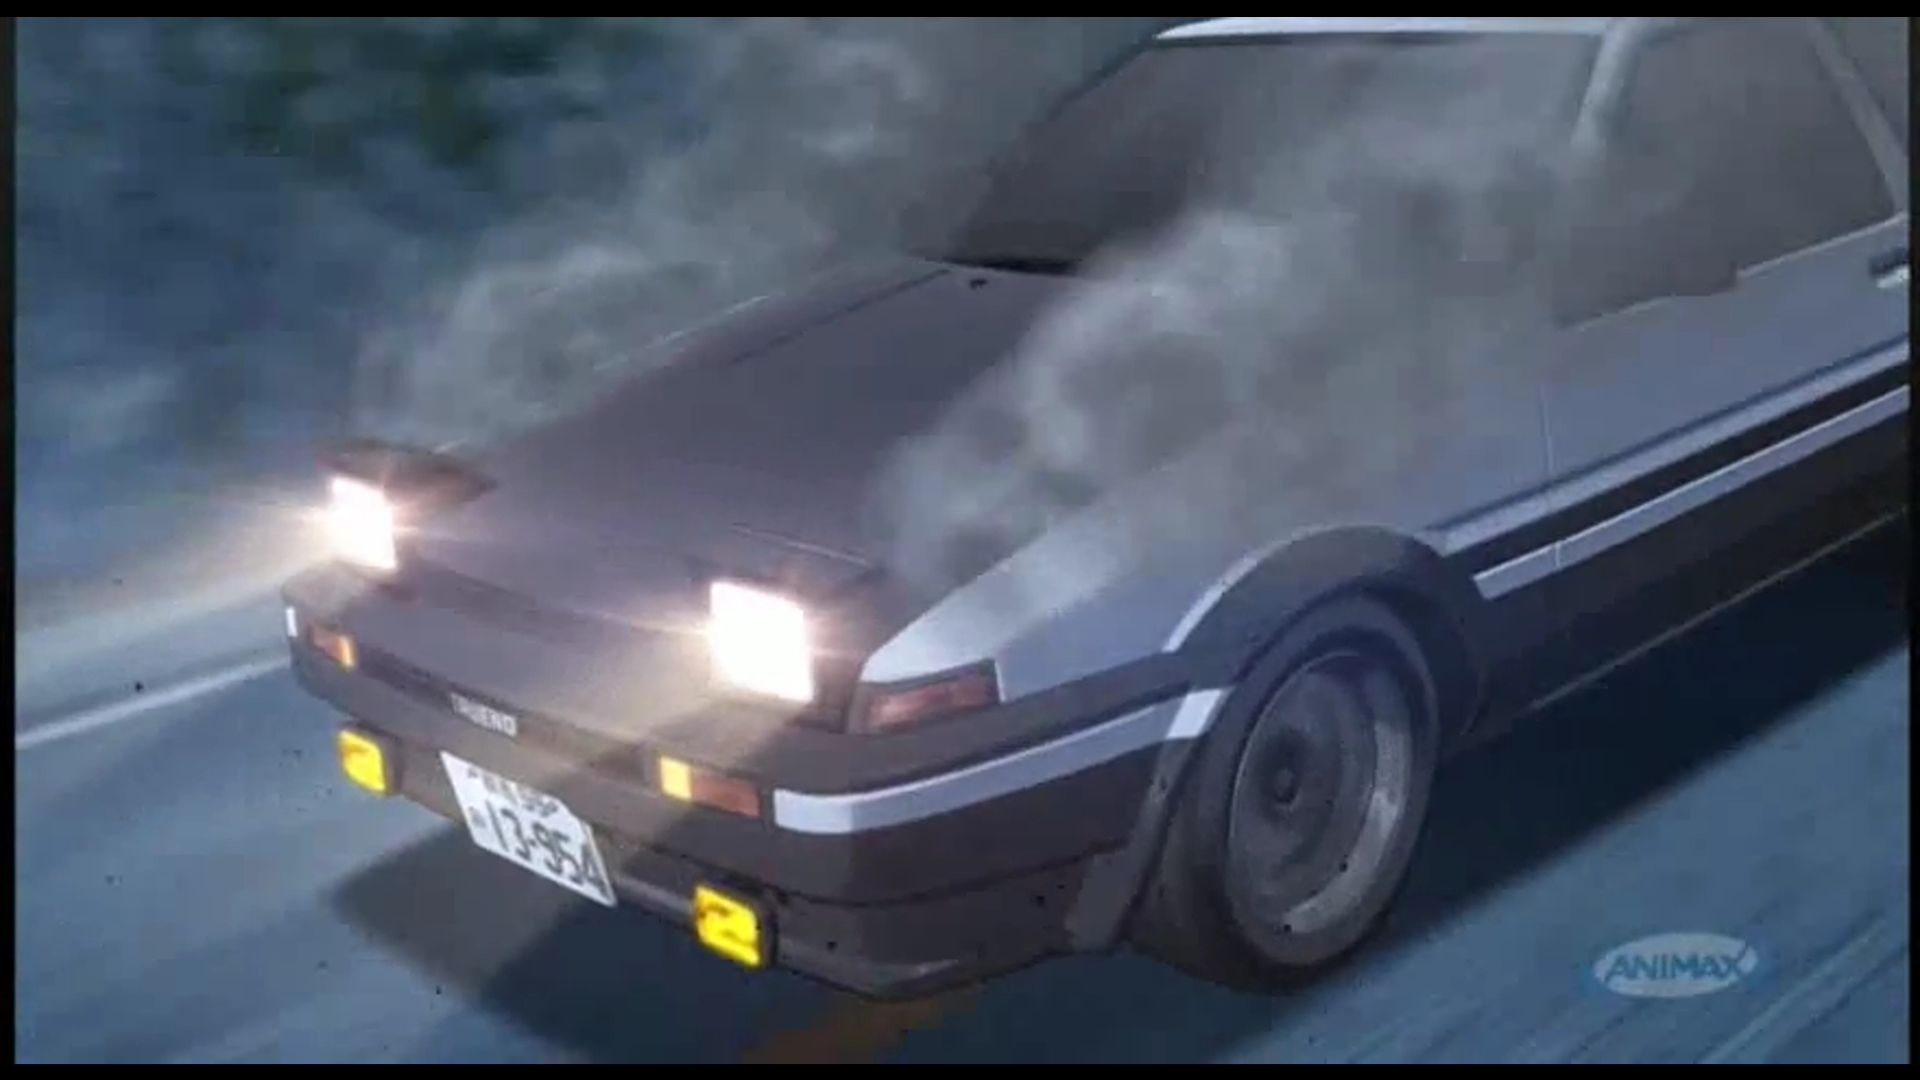 Initial D Final Stage wallpaper, Anime, HQ Initial D Final Stage pictureK Wallpaper 2019